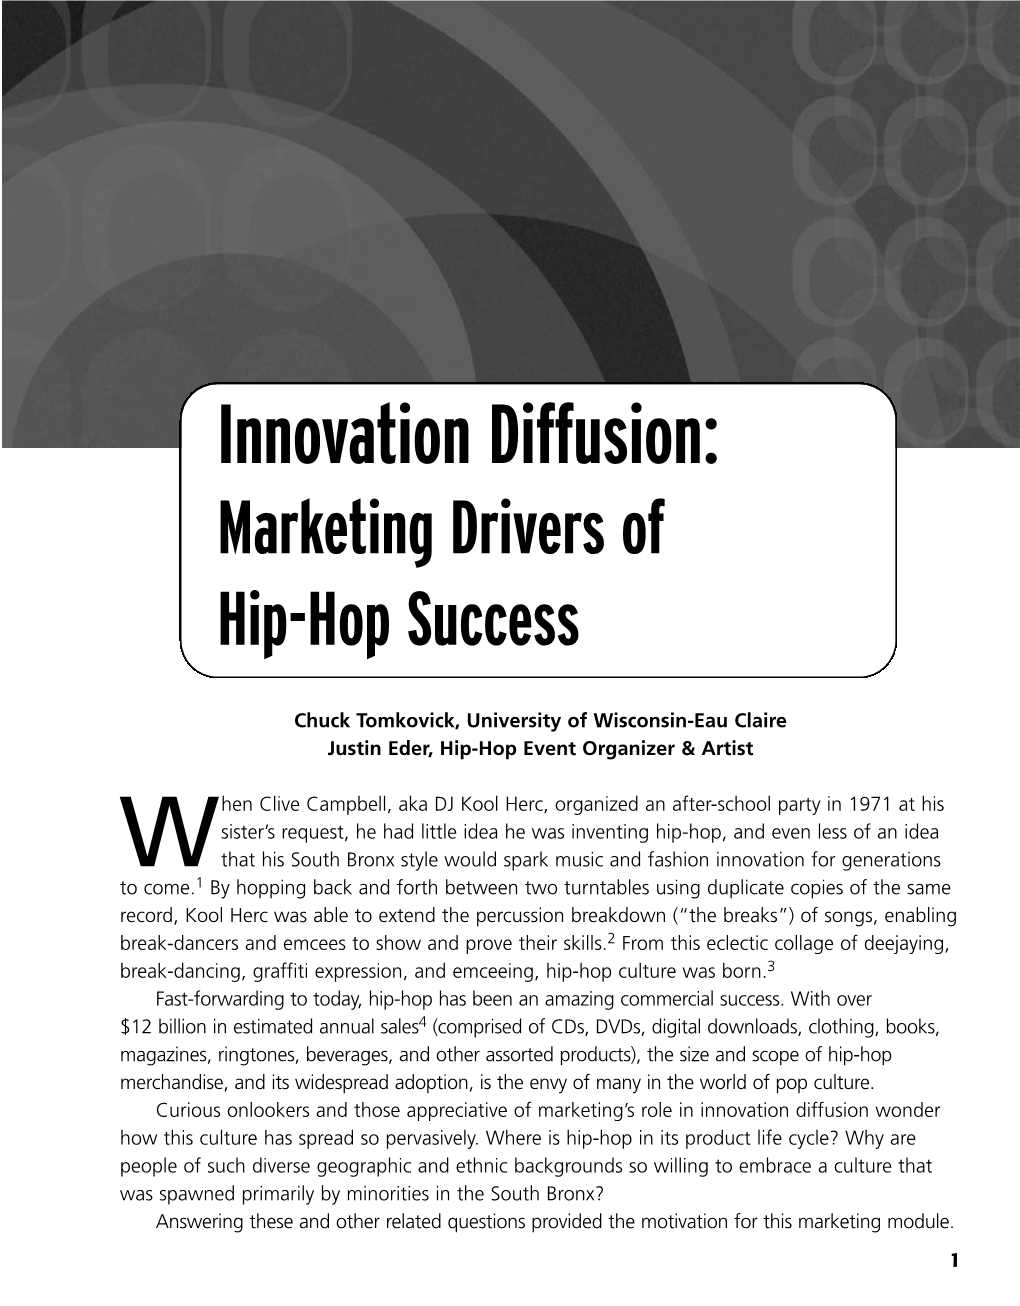 Innovation Diffusion: Marketing Drivers of Hip-Hop Success